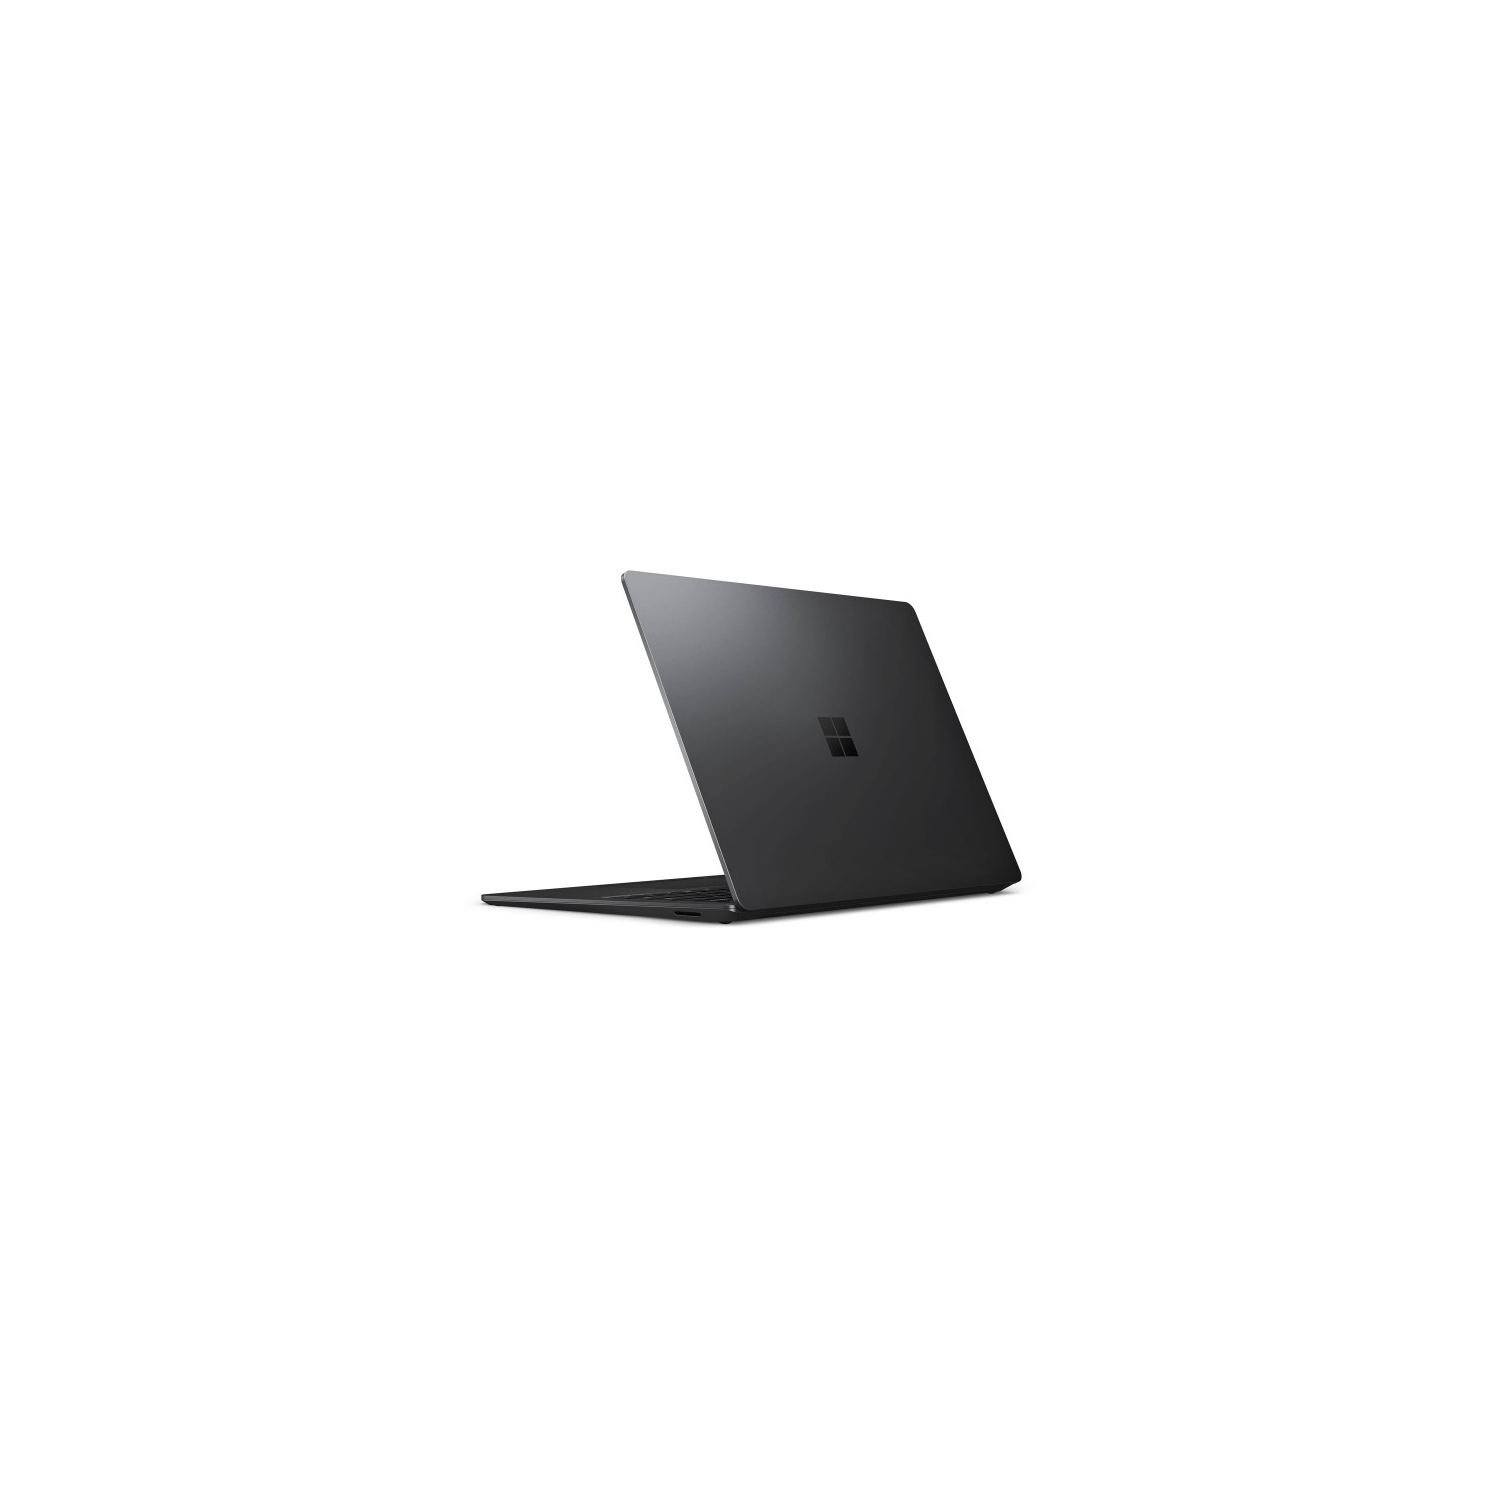 Refurbished (Good) - Microsoft Surface Laptop 3 - 15" Touch-Screen - 1TB SSD / AMD Ryzen 7 Surface Edition / 32GB Memory - (Latest Model)